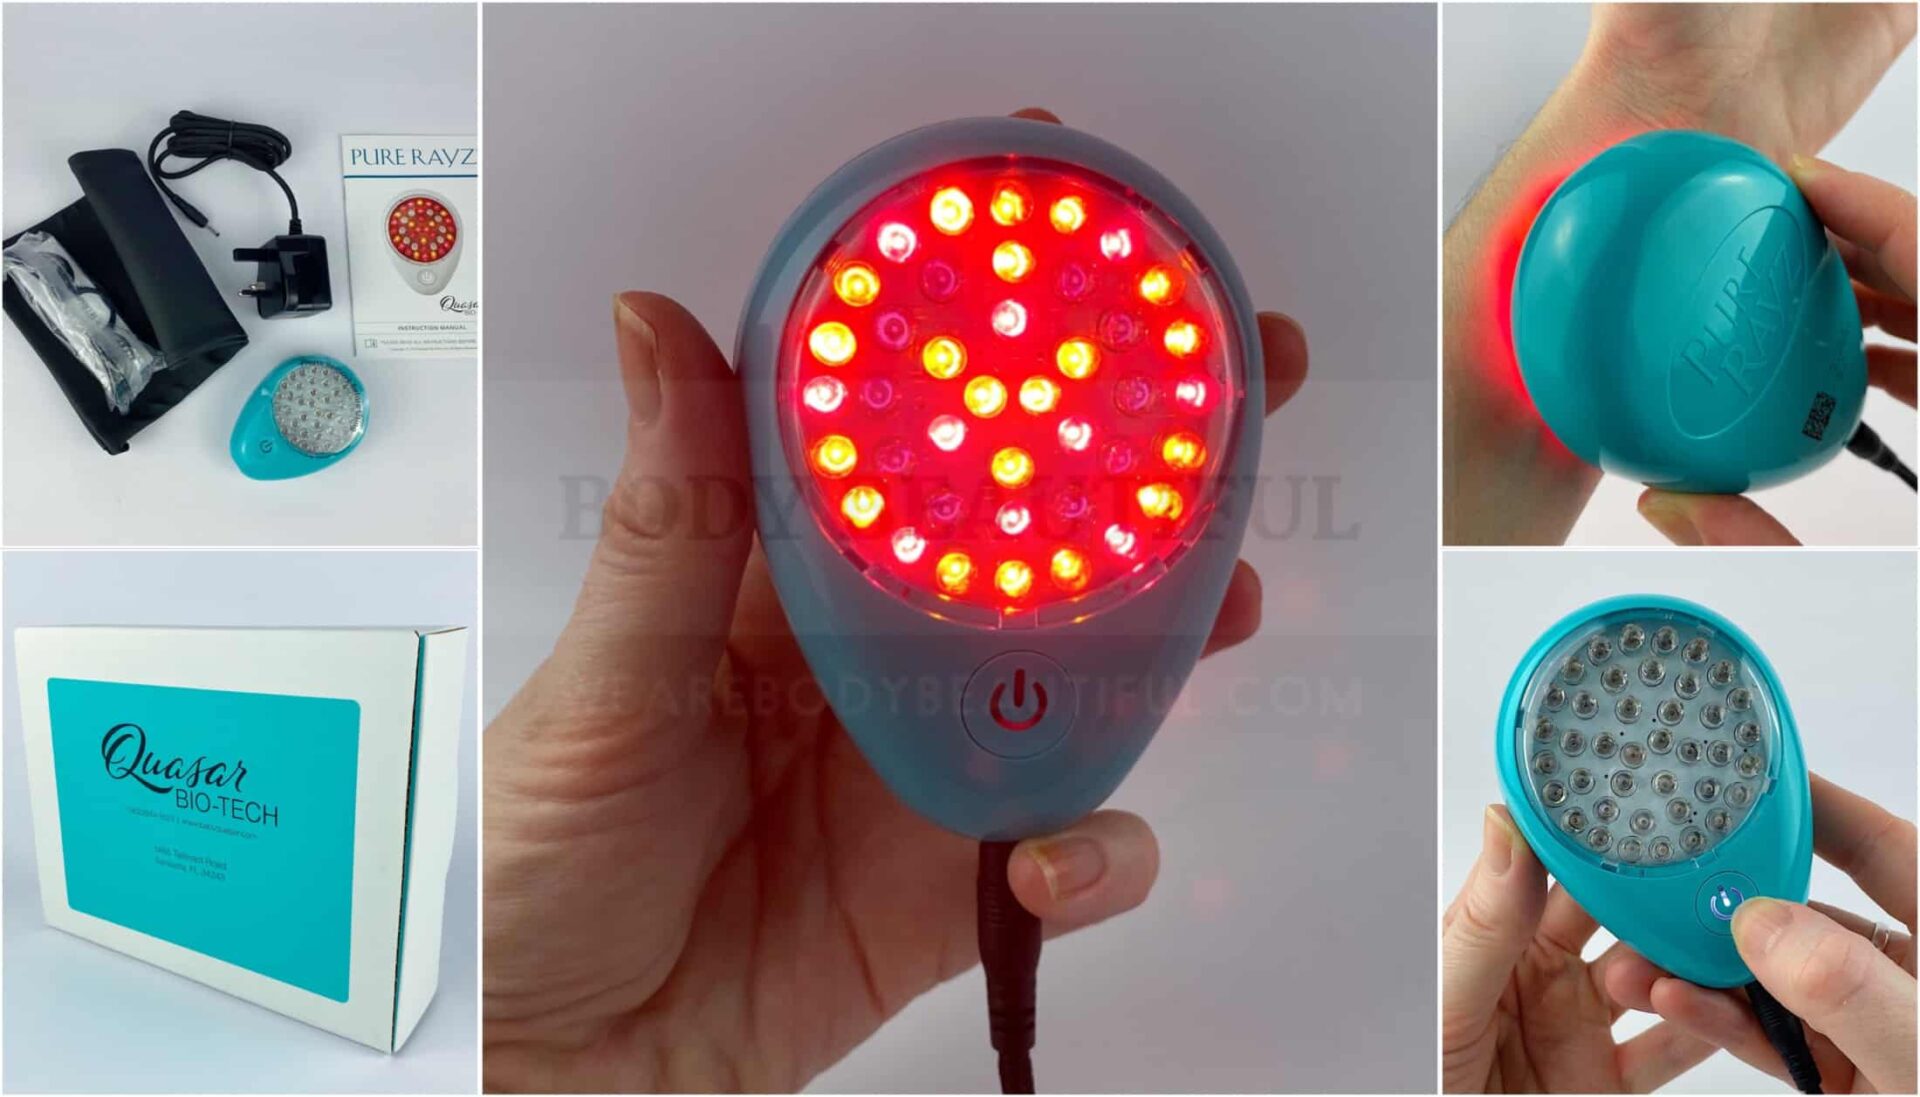 Quasar Pure Rayz red & NIR light review tried & tested by weAreBodyBeautiful.com